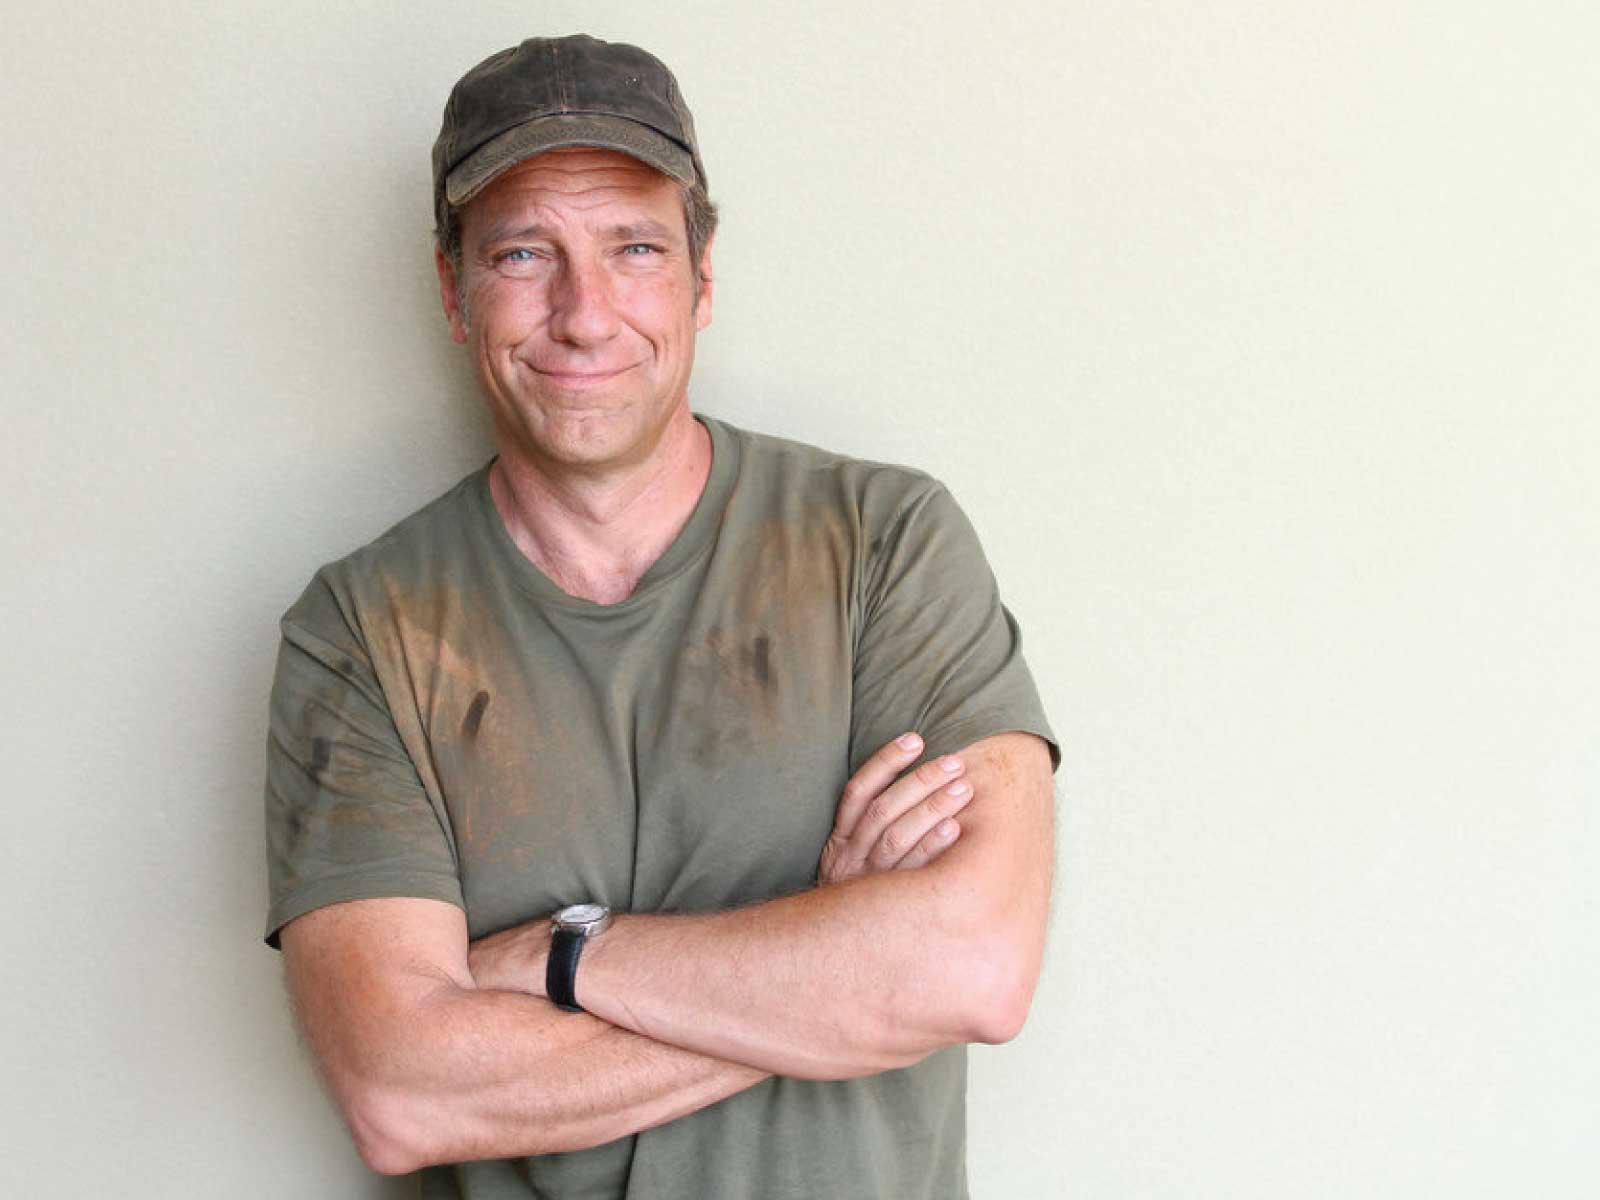 How tall is Mike Rowe?